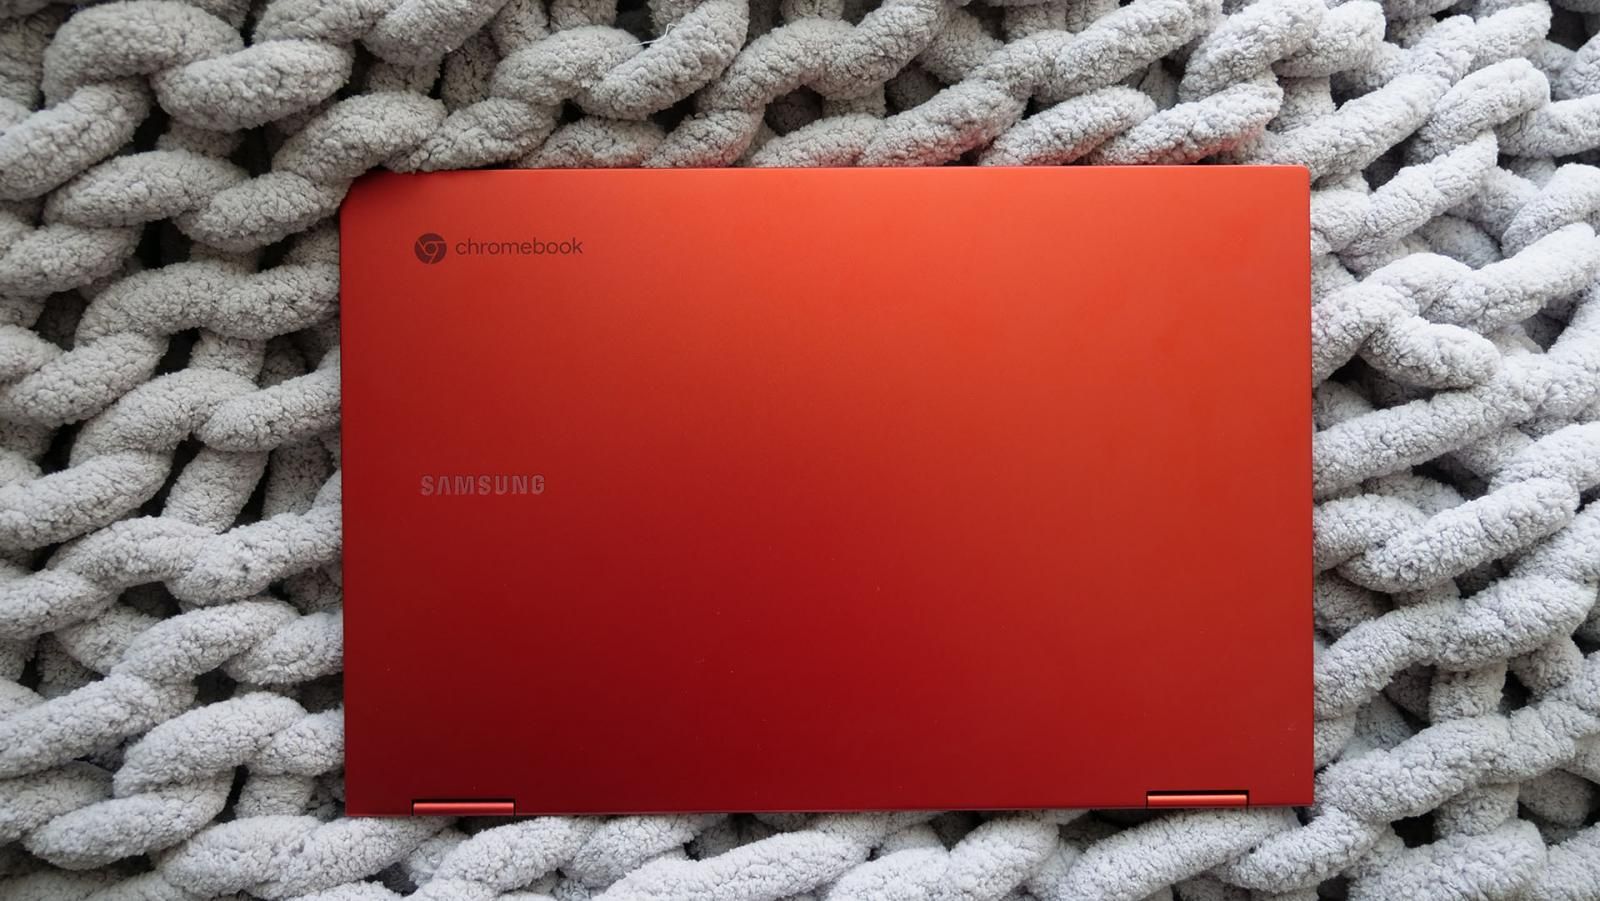 Galaxy Chromebook 2 review